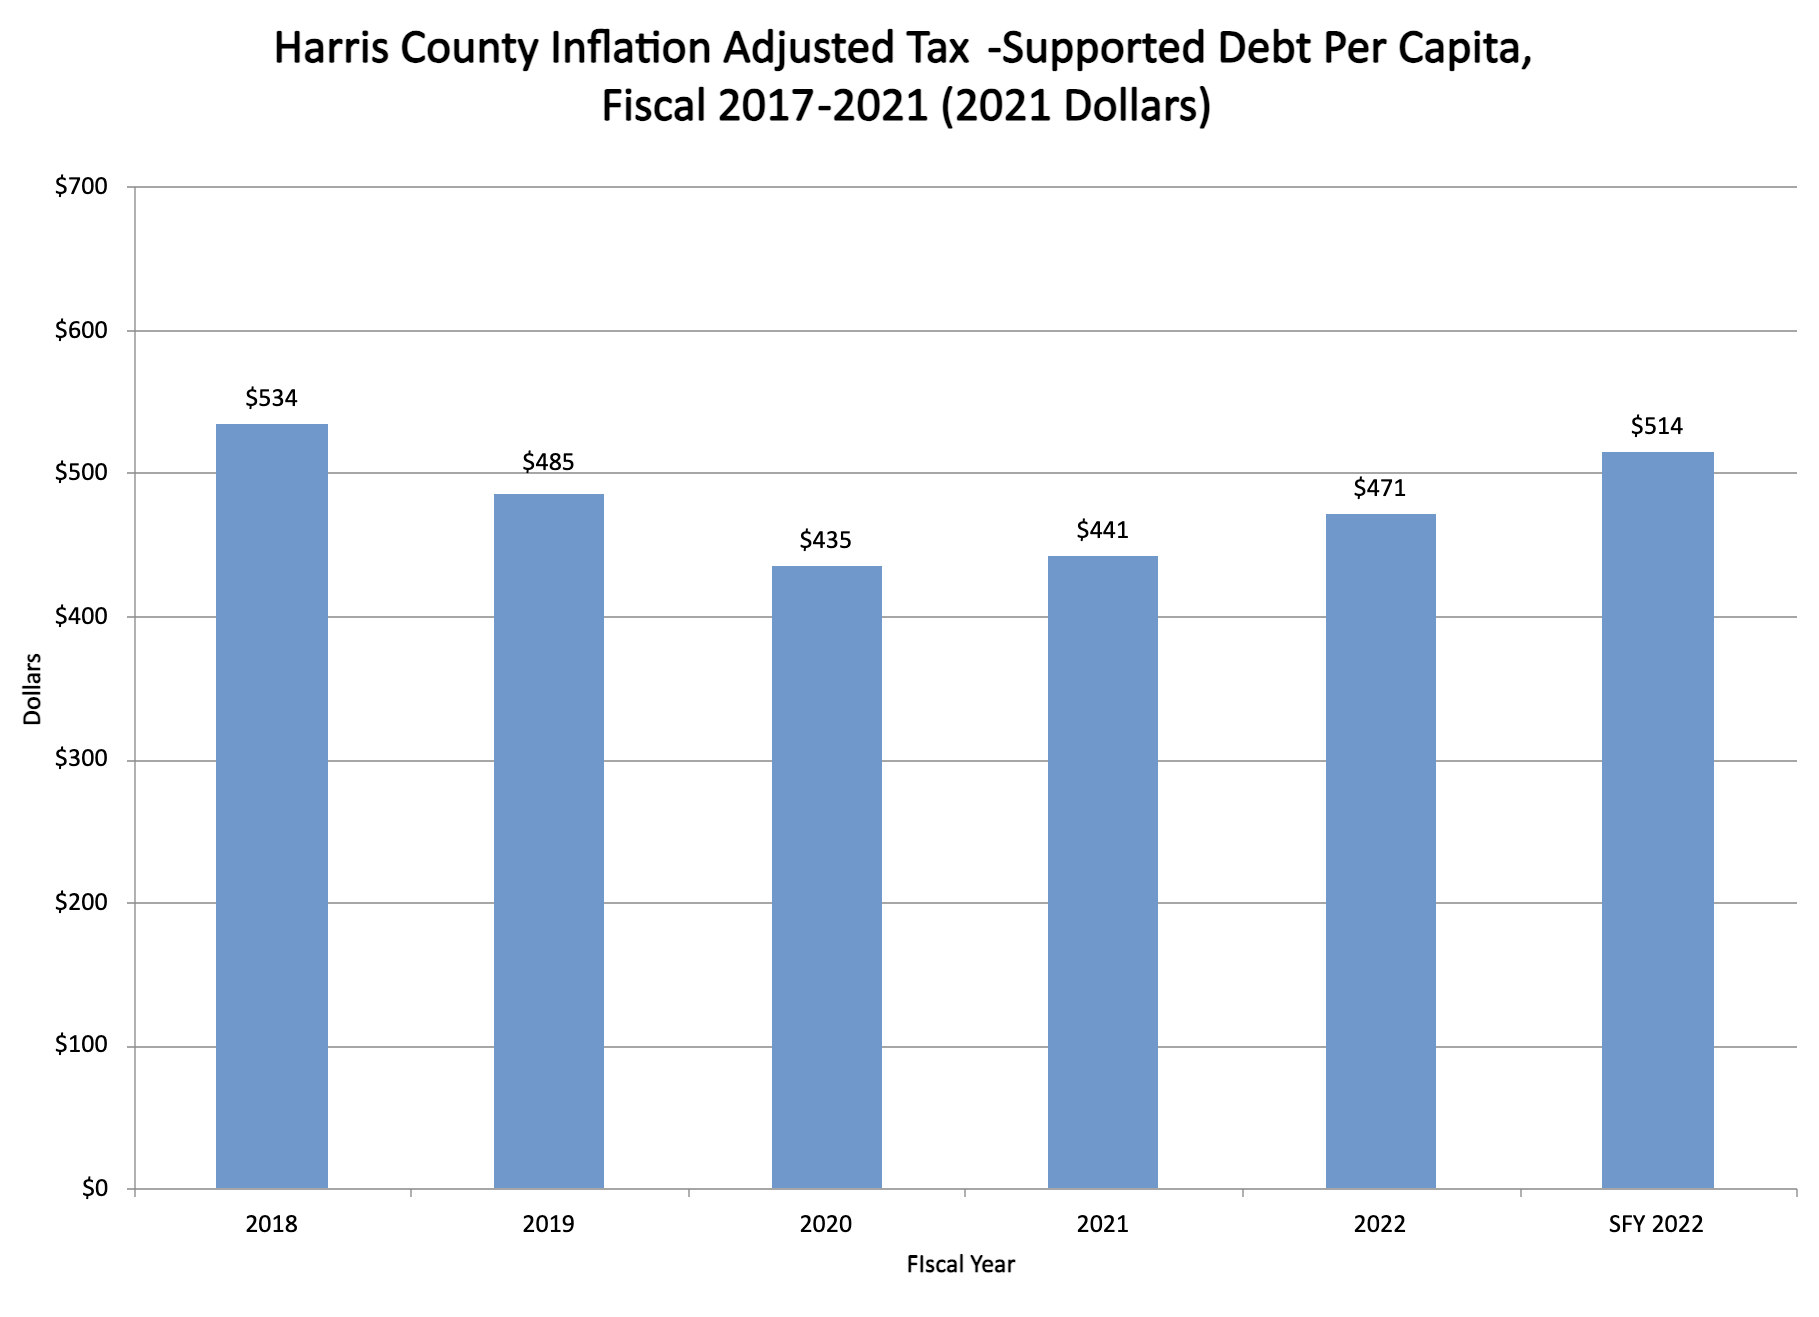 HC Inflation Adjusted Tax-Supported Debt Per Capita,Fiscal 2018-2022 (2021 Dollars)